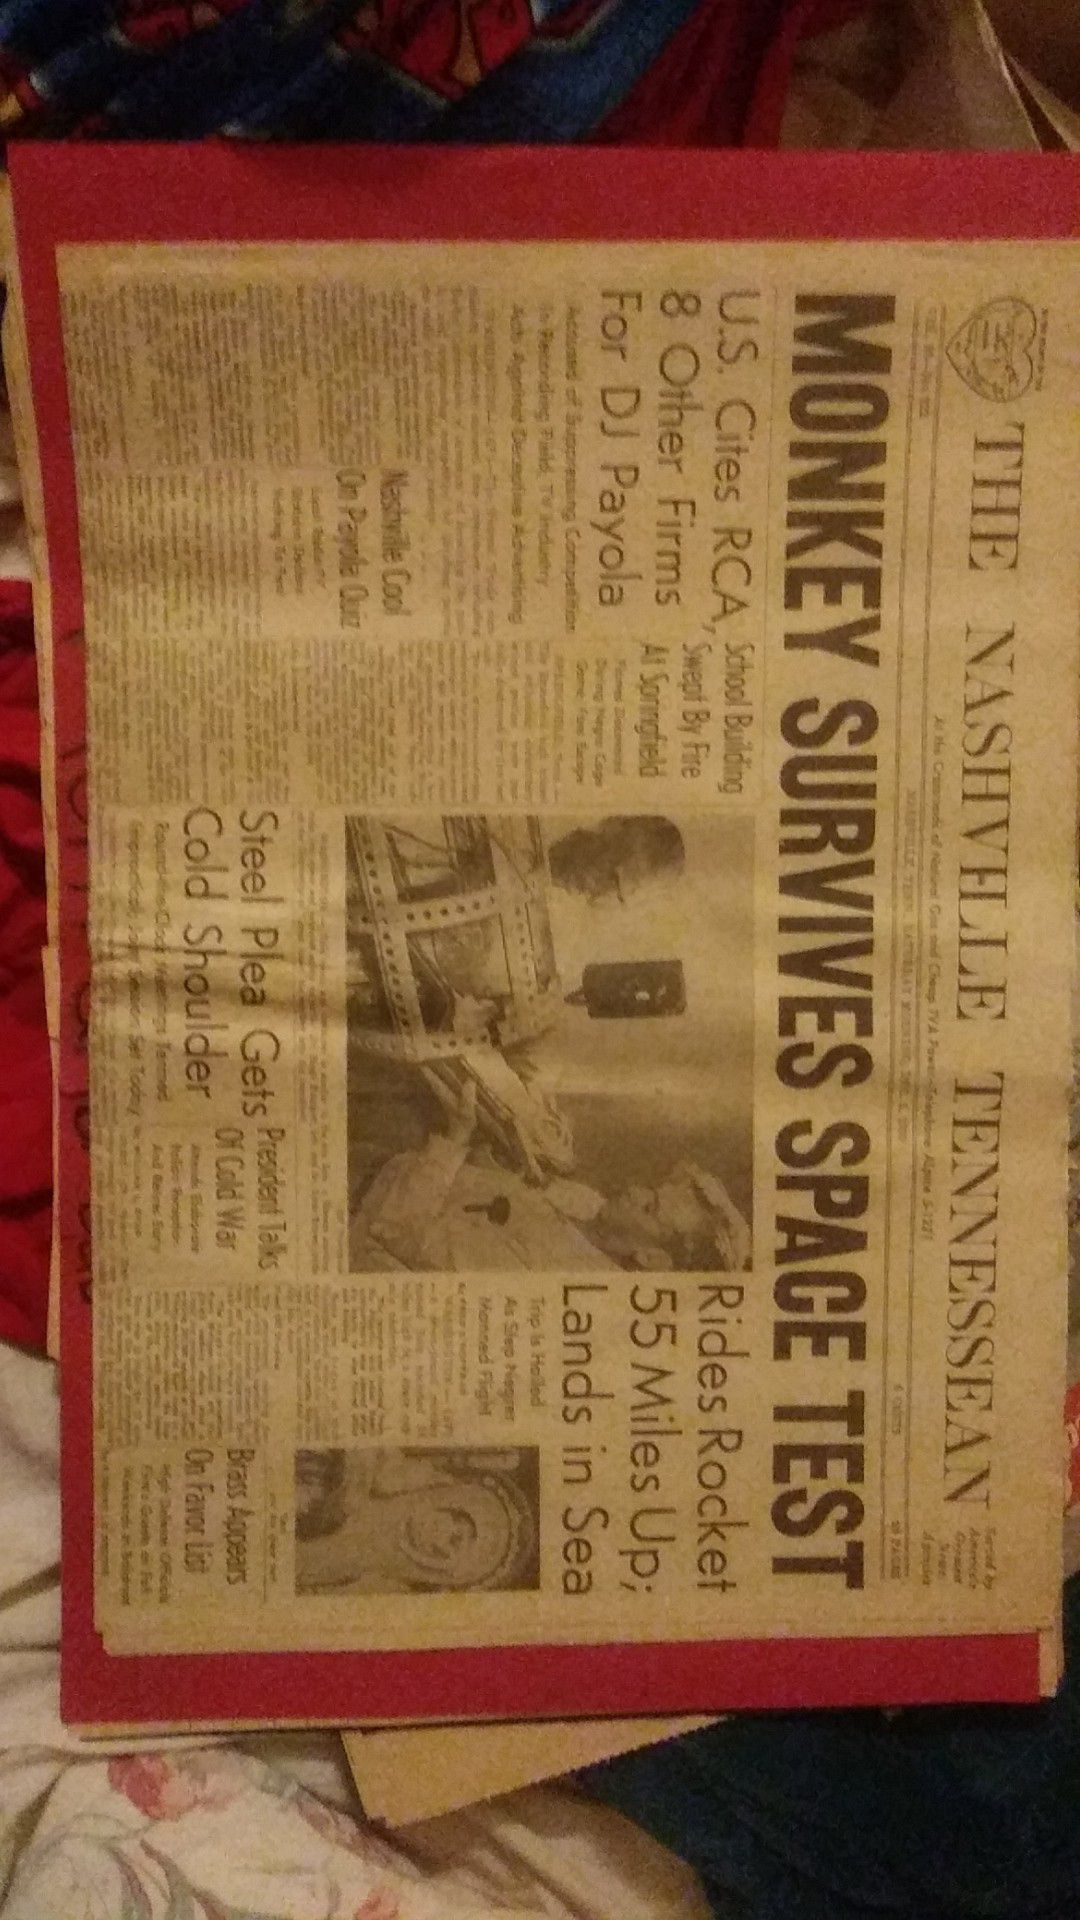 The actual Nashville Tennessean Newspaper from 1959